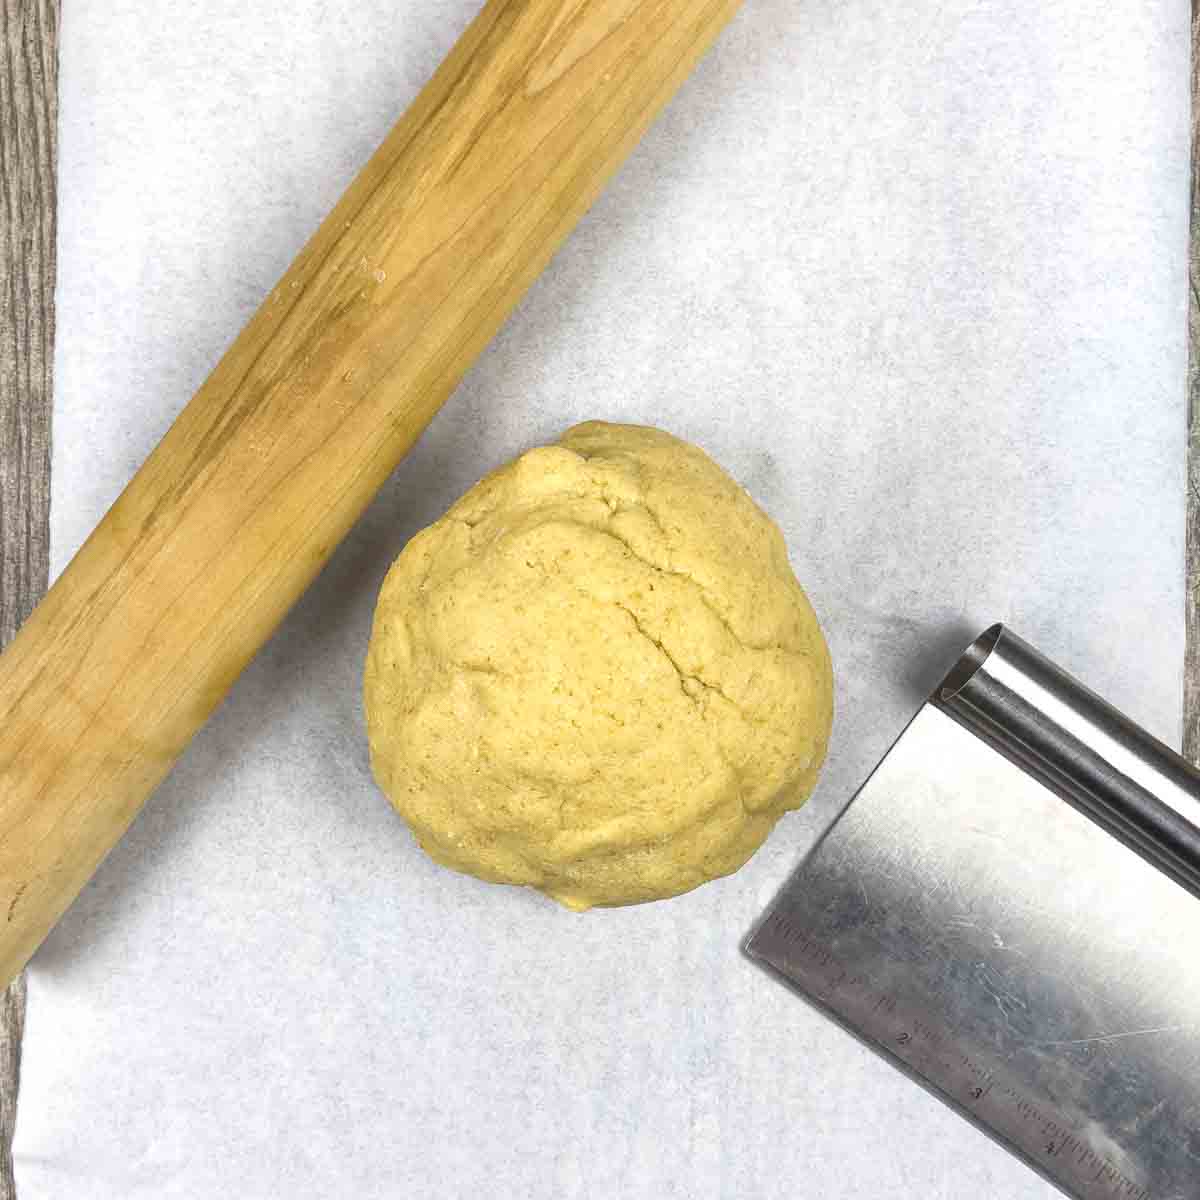 Ball of dough with a rolling pin and a pastry cutter on parchment paper.